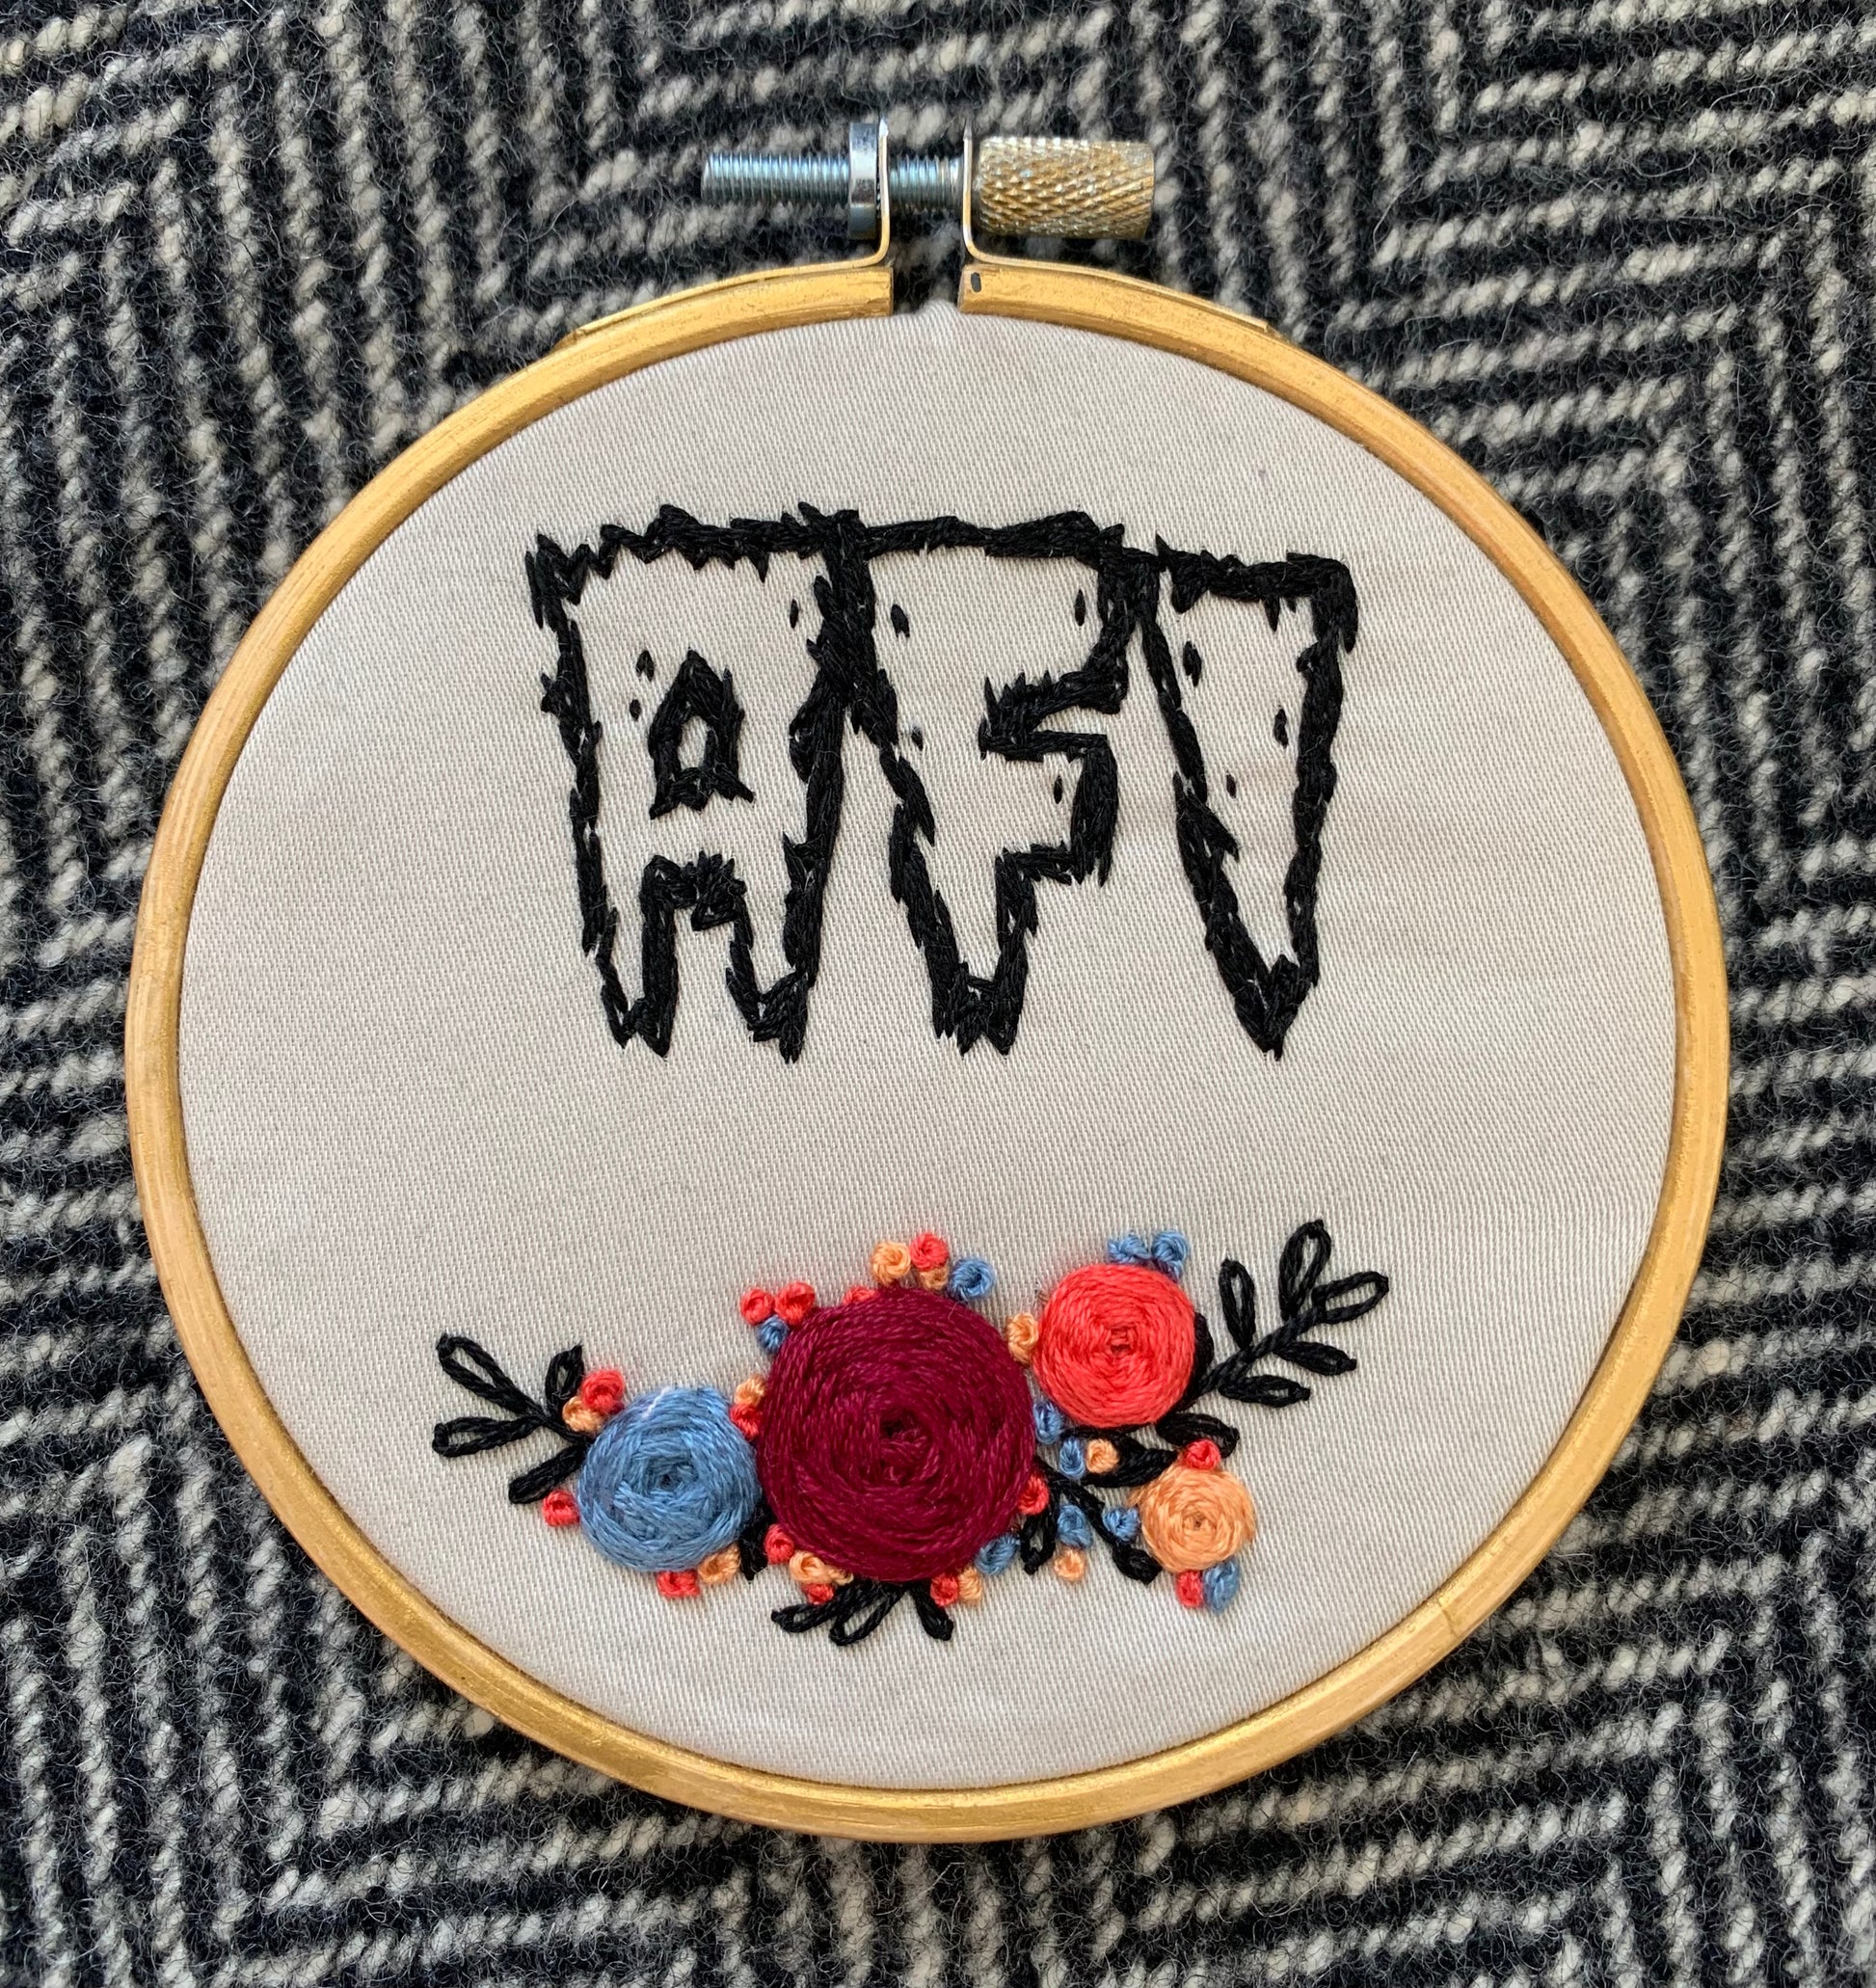 an embroidery hoop, painted gold, with florals and the letters "AFI"